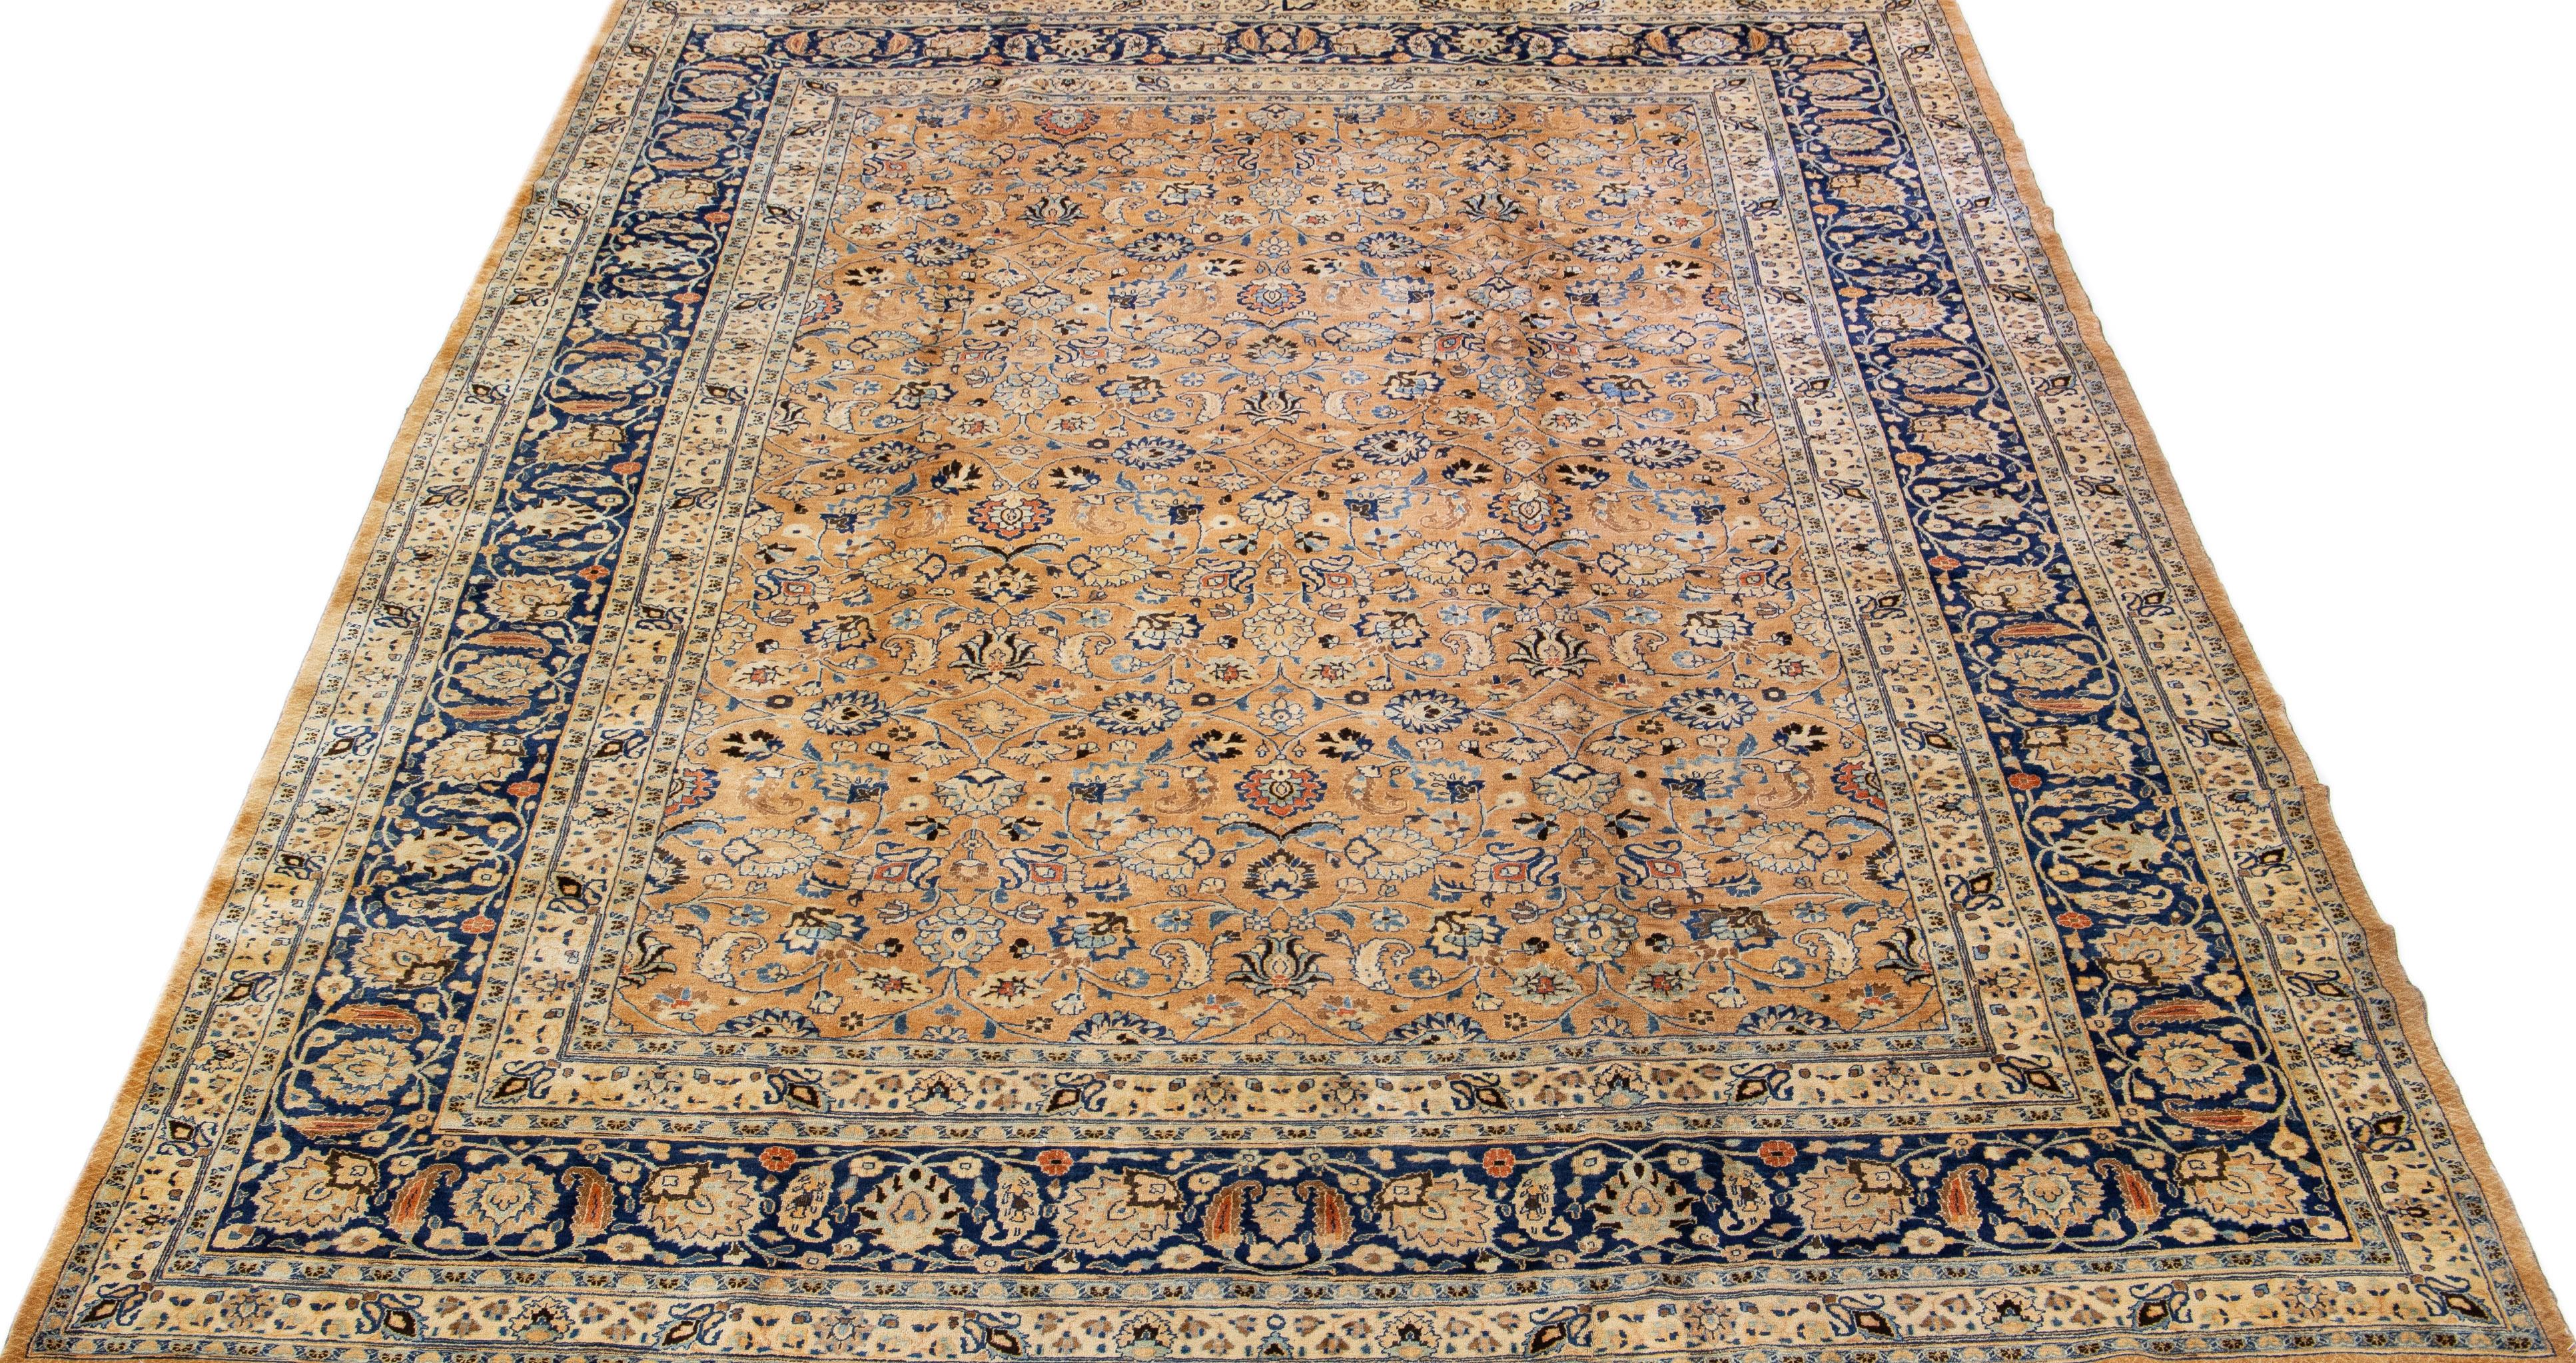 Beautiful Antique Mashad hand-knotted wool rug with a tan color field. This Persian rug has a blue designed frame with accents in a gorgeous classic floral design. 

This rug measures: 10'6